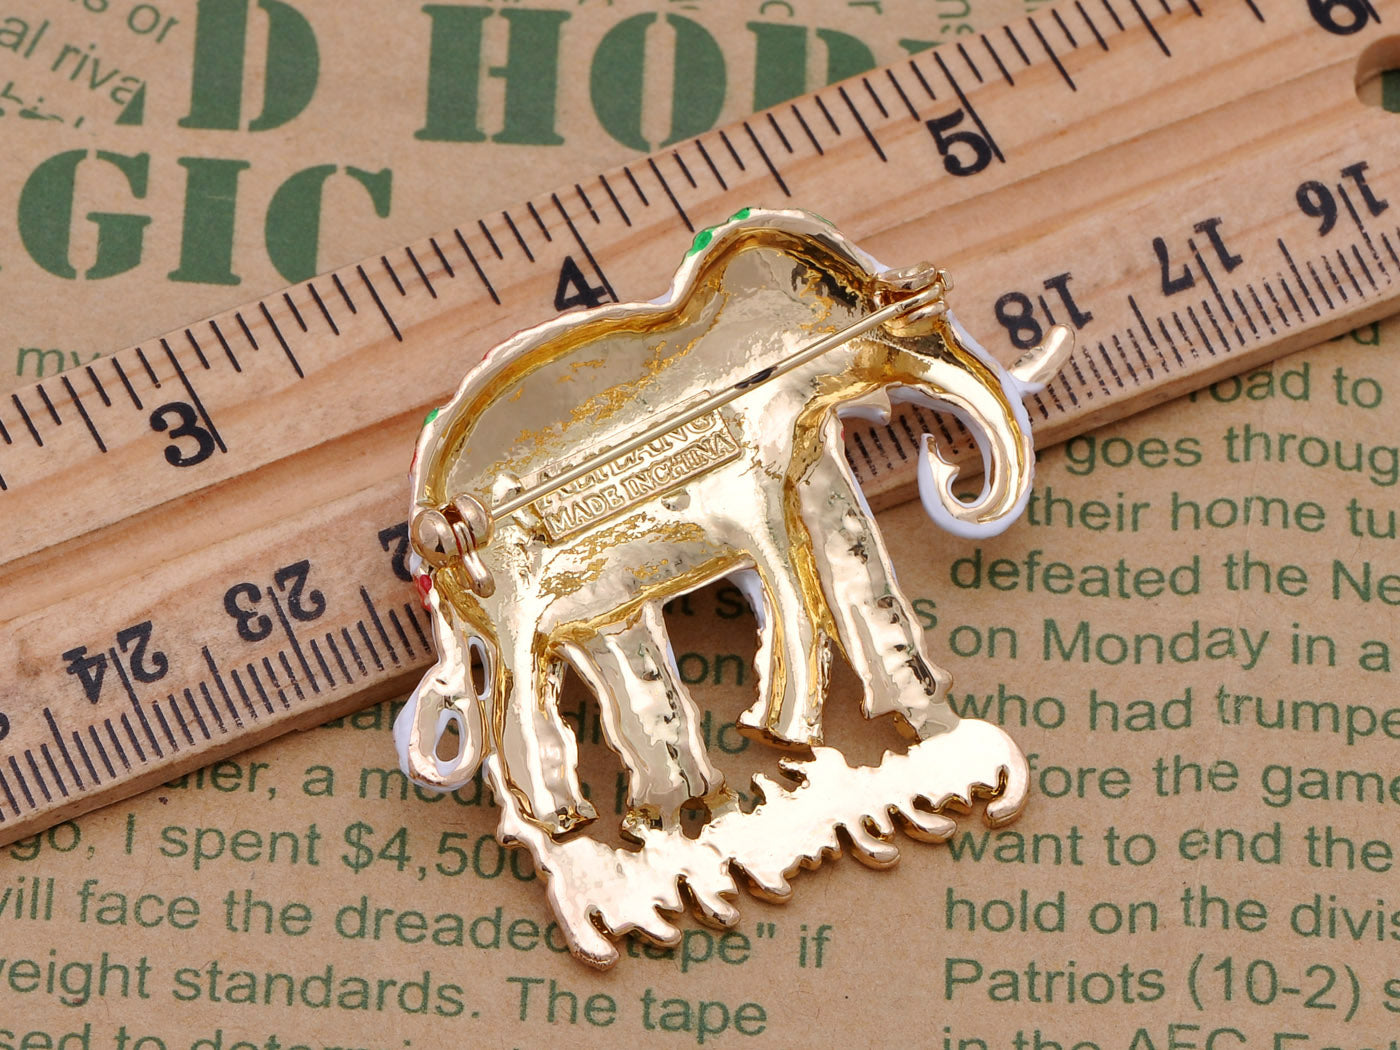 Ivory Colored Feet Sparkling Eyes Gentle Thailand Elephant Brooch